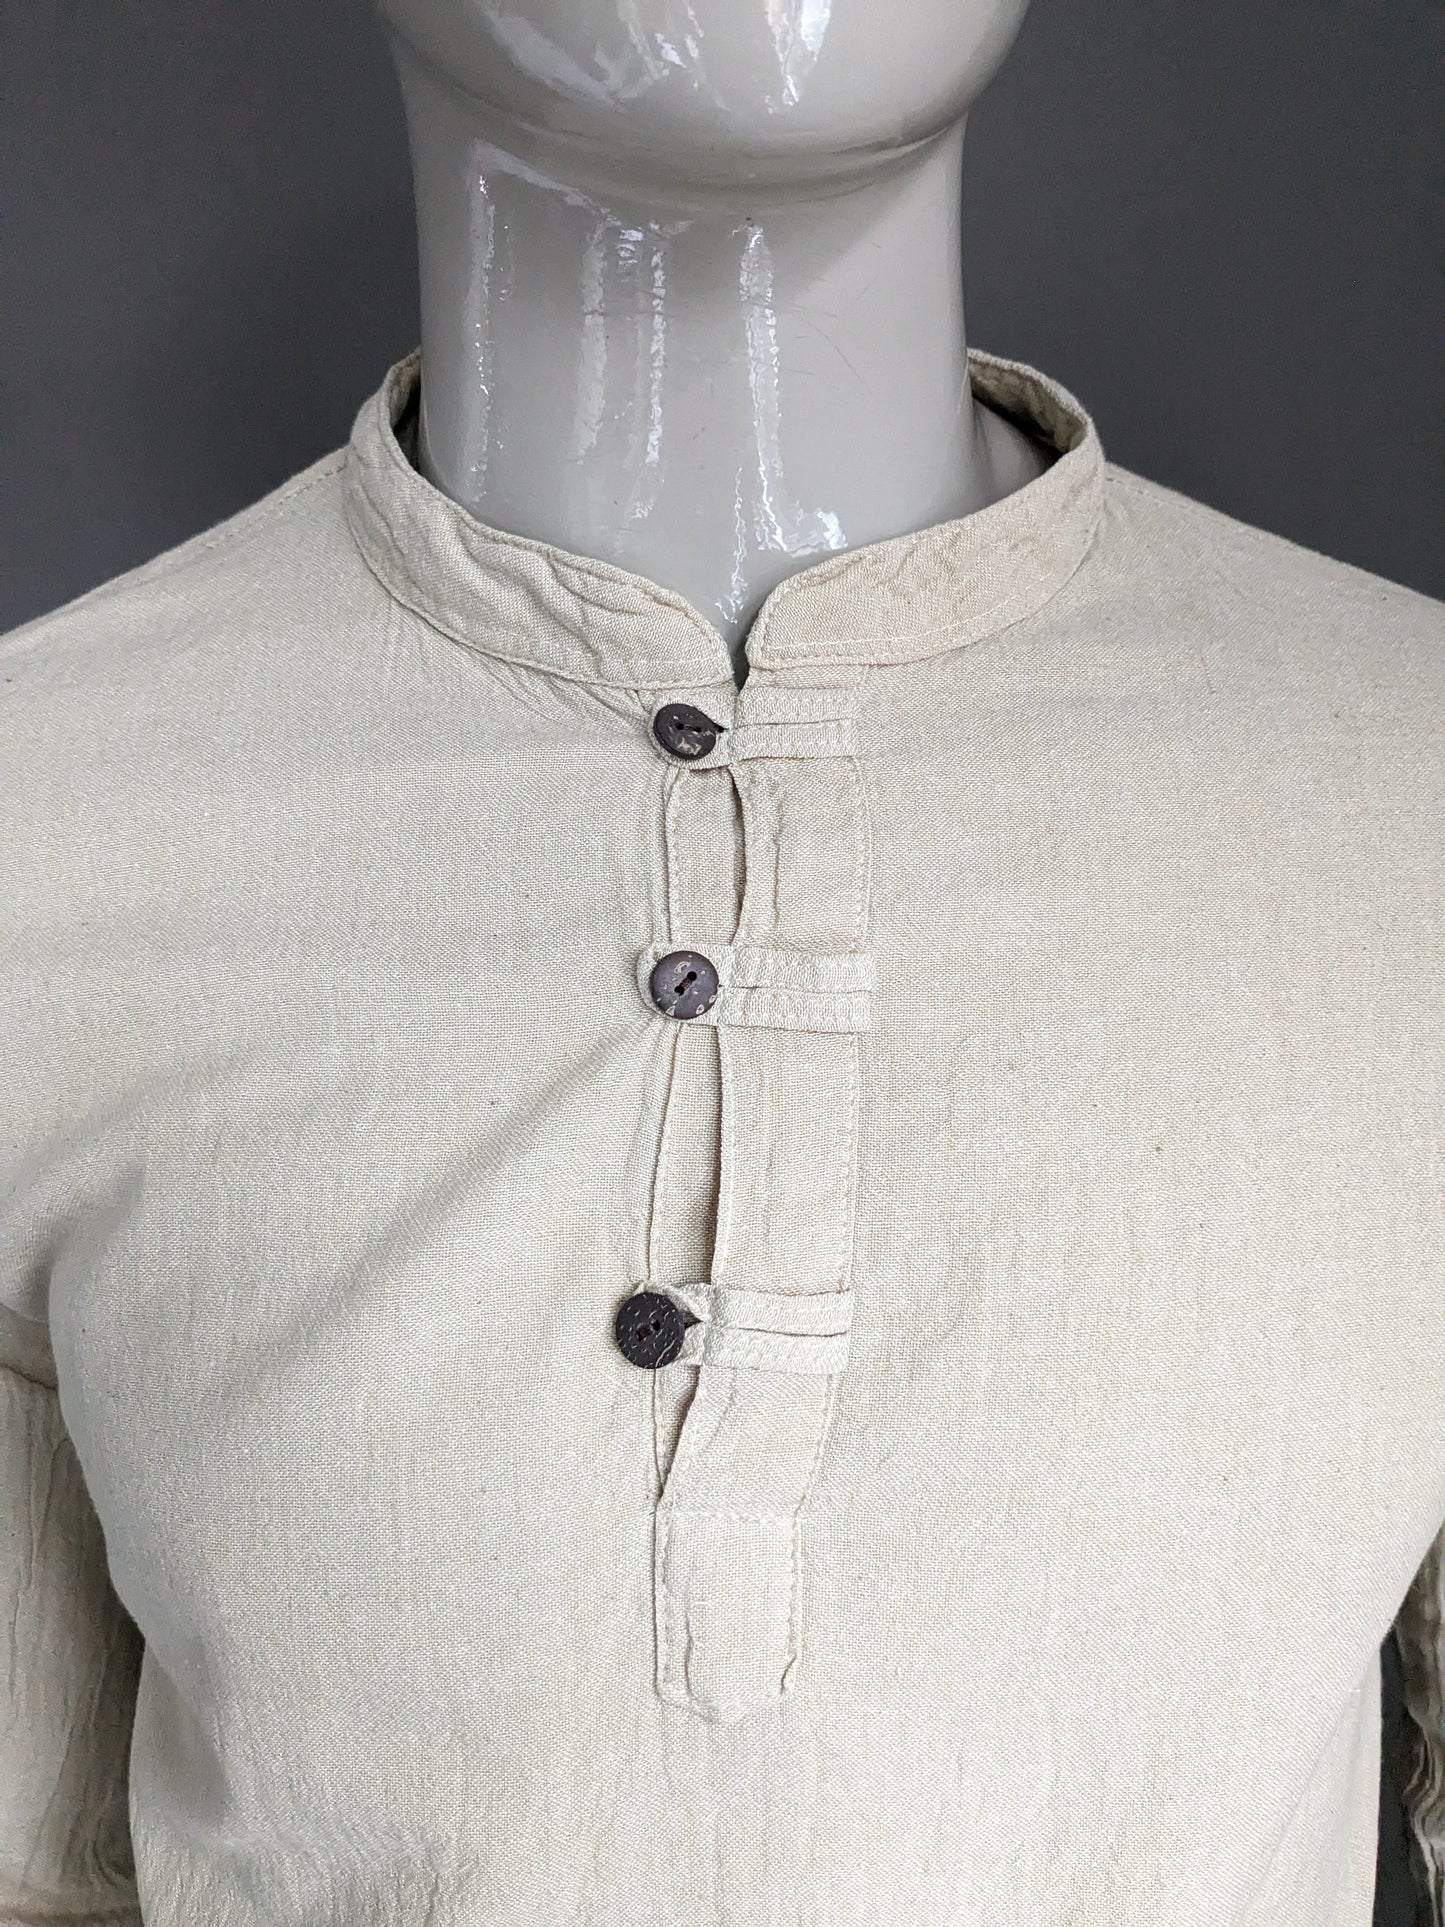 Vintage shirt / longsleeve long sleeve with buttons and mao / raised collar. Light brown. Size M.